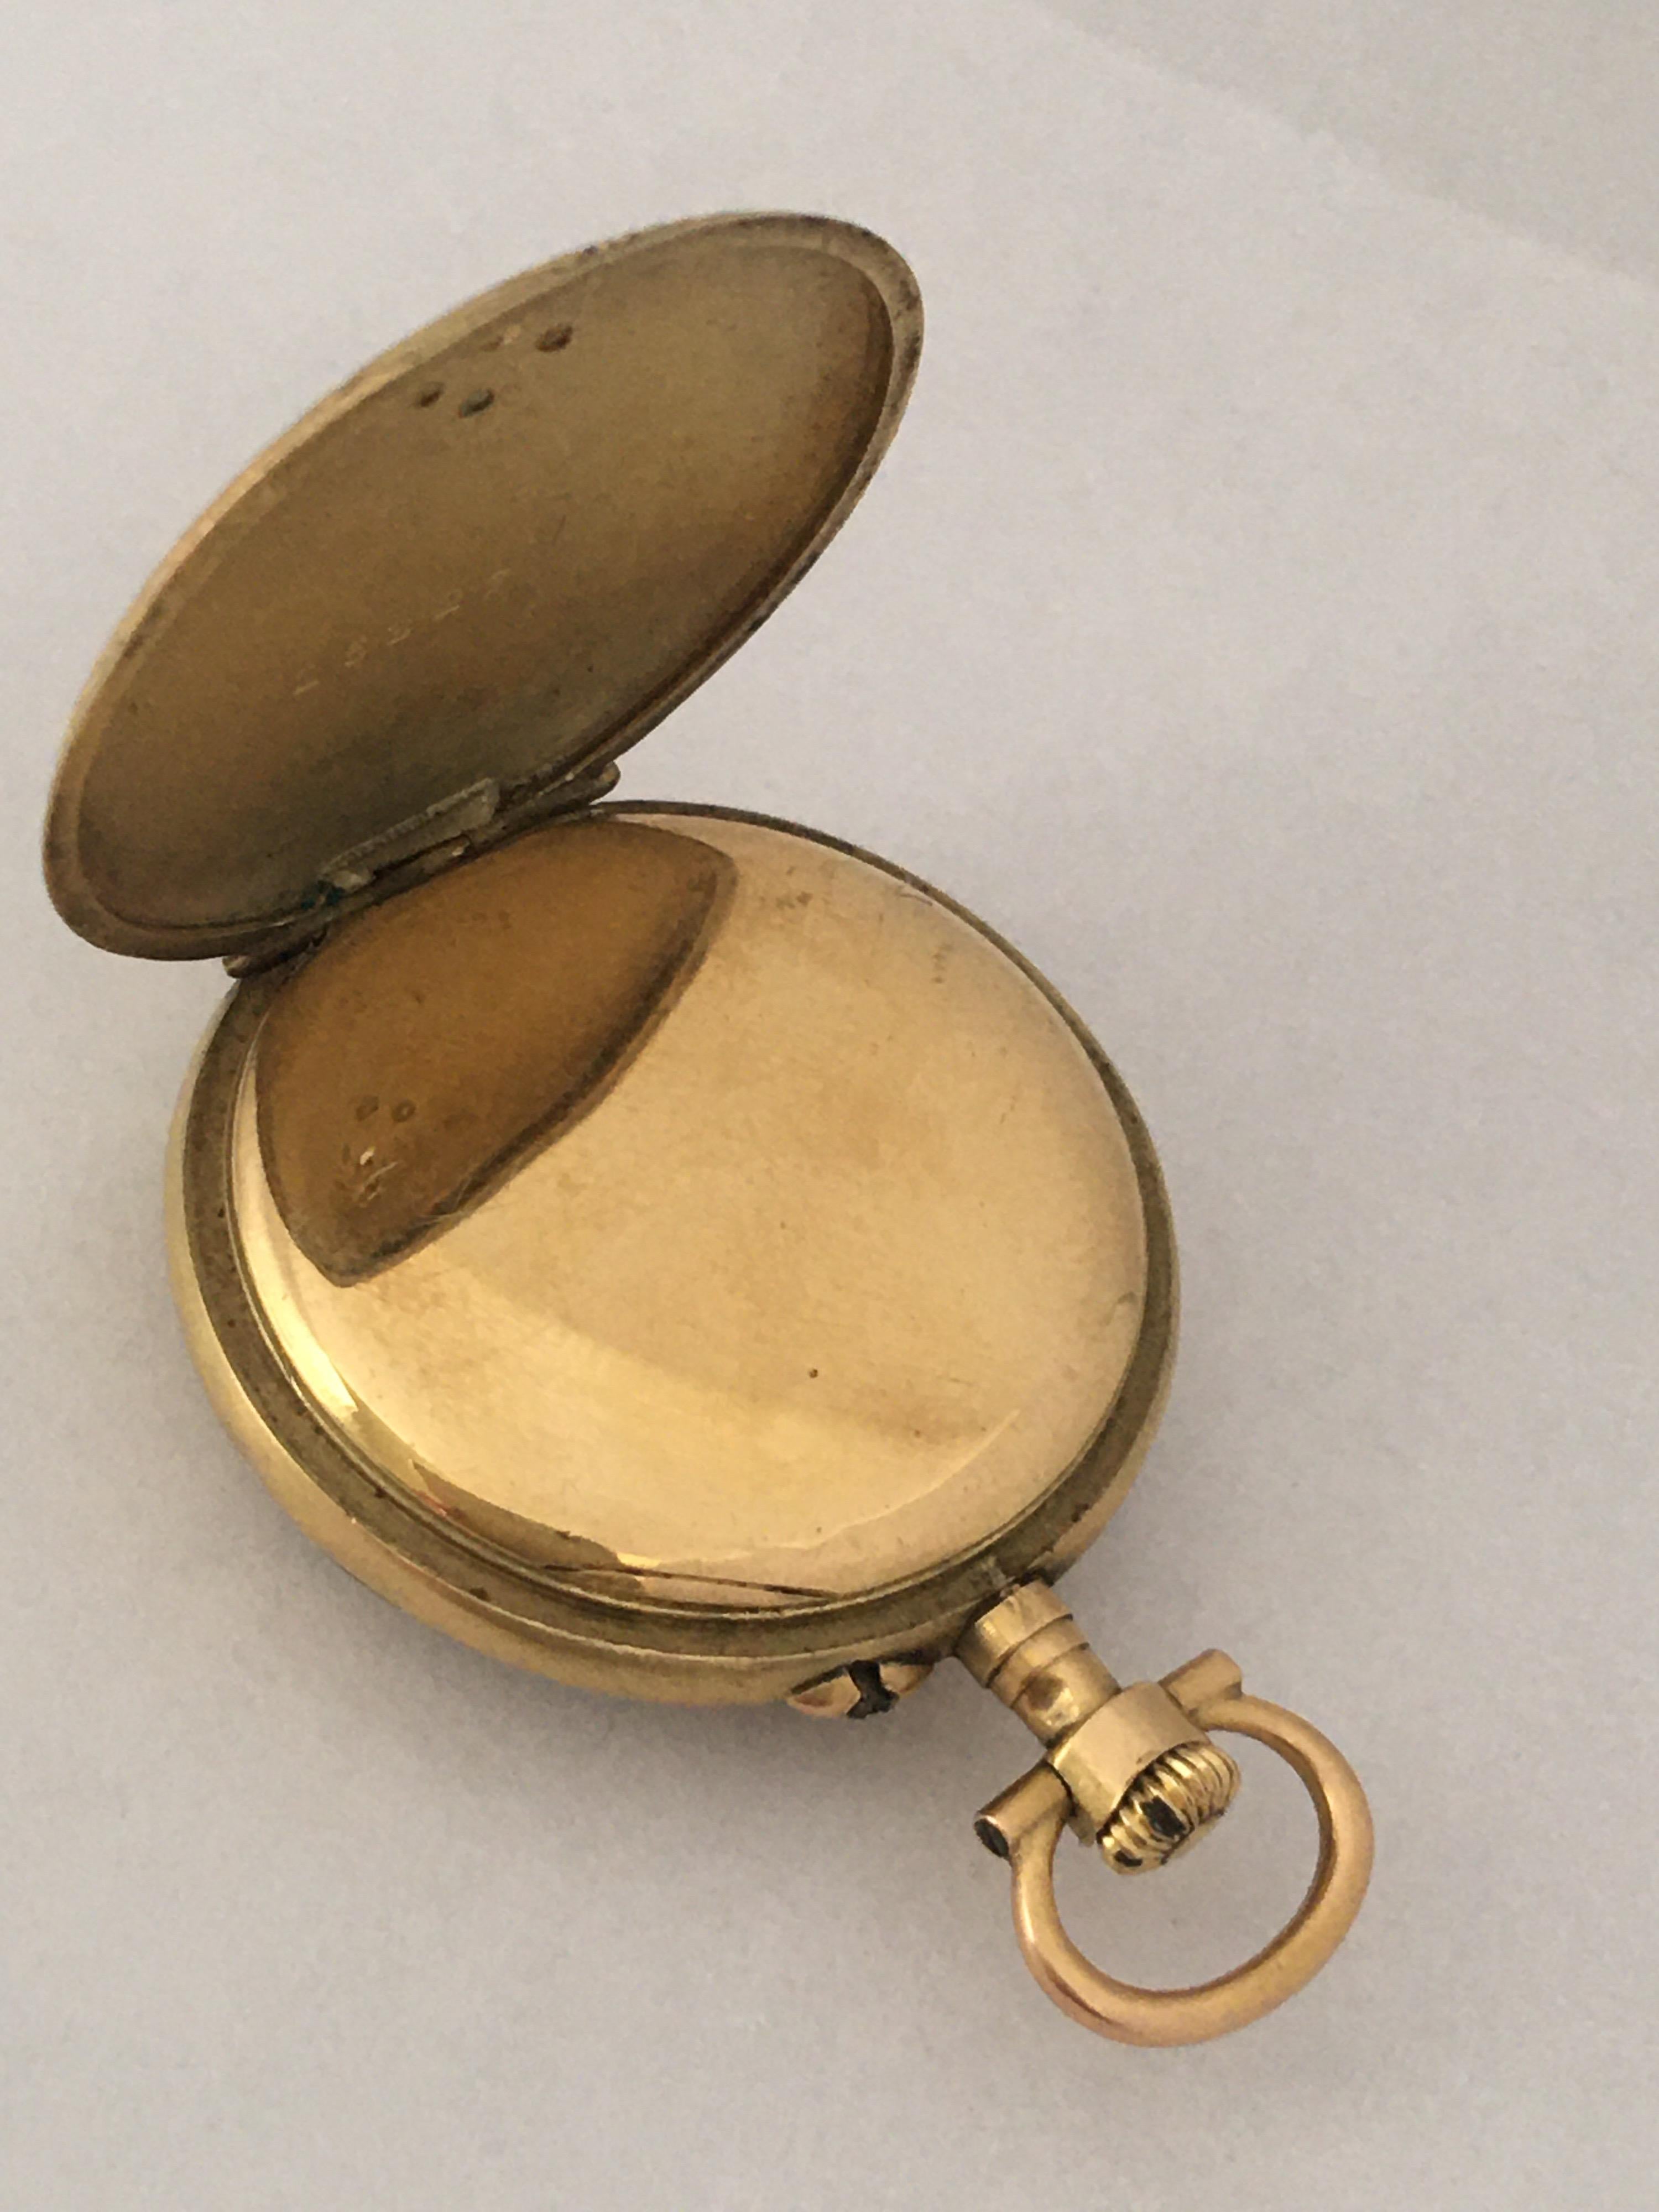 18 Karat Gold and Diamonds with Touched of Purple Enamel Fob / Pocket Watch In Good Condition For Sale In Carlisle, GB